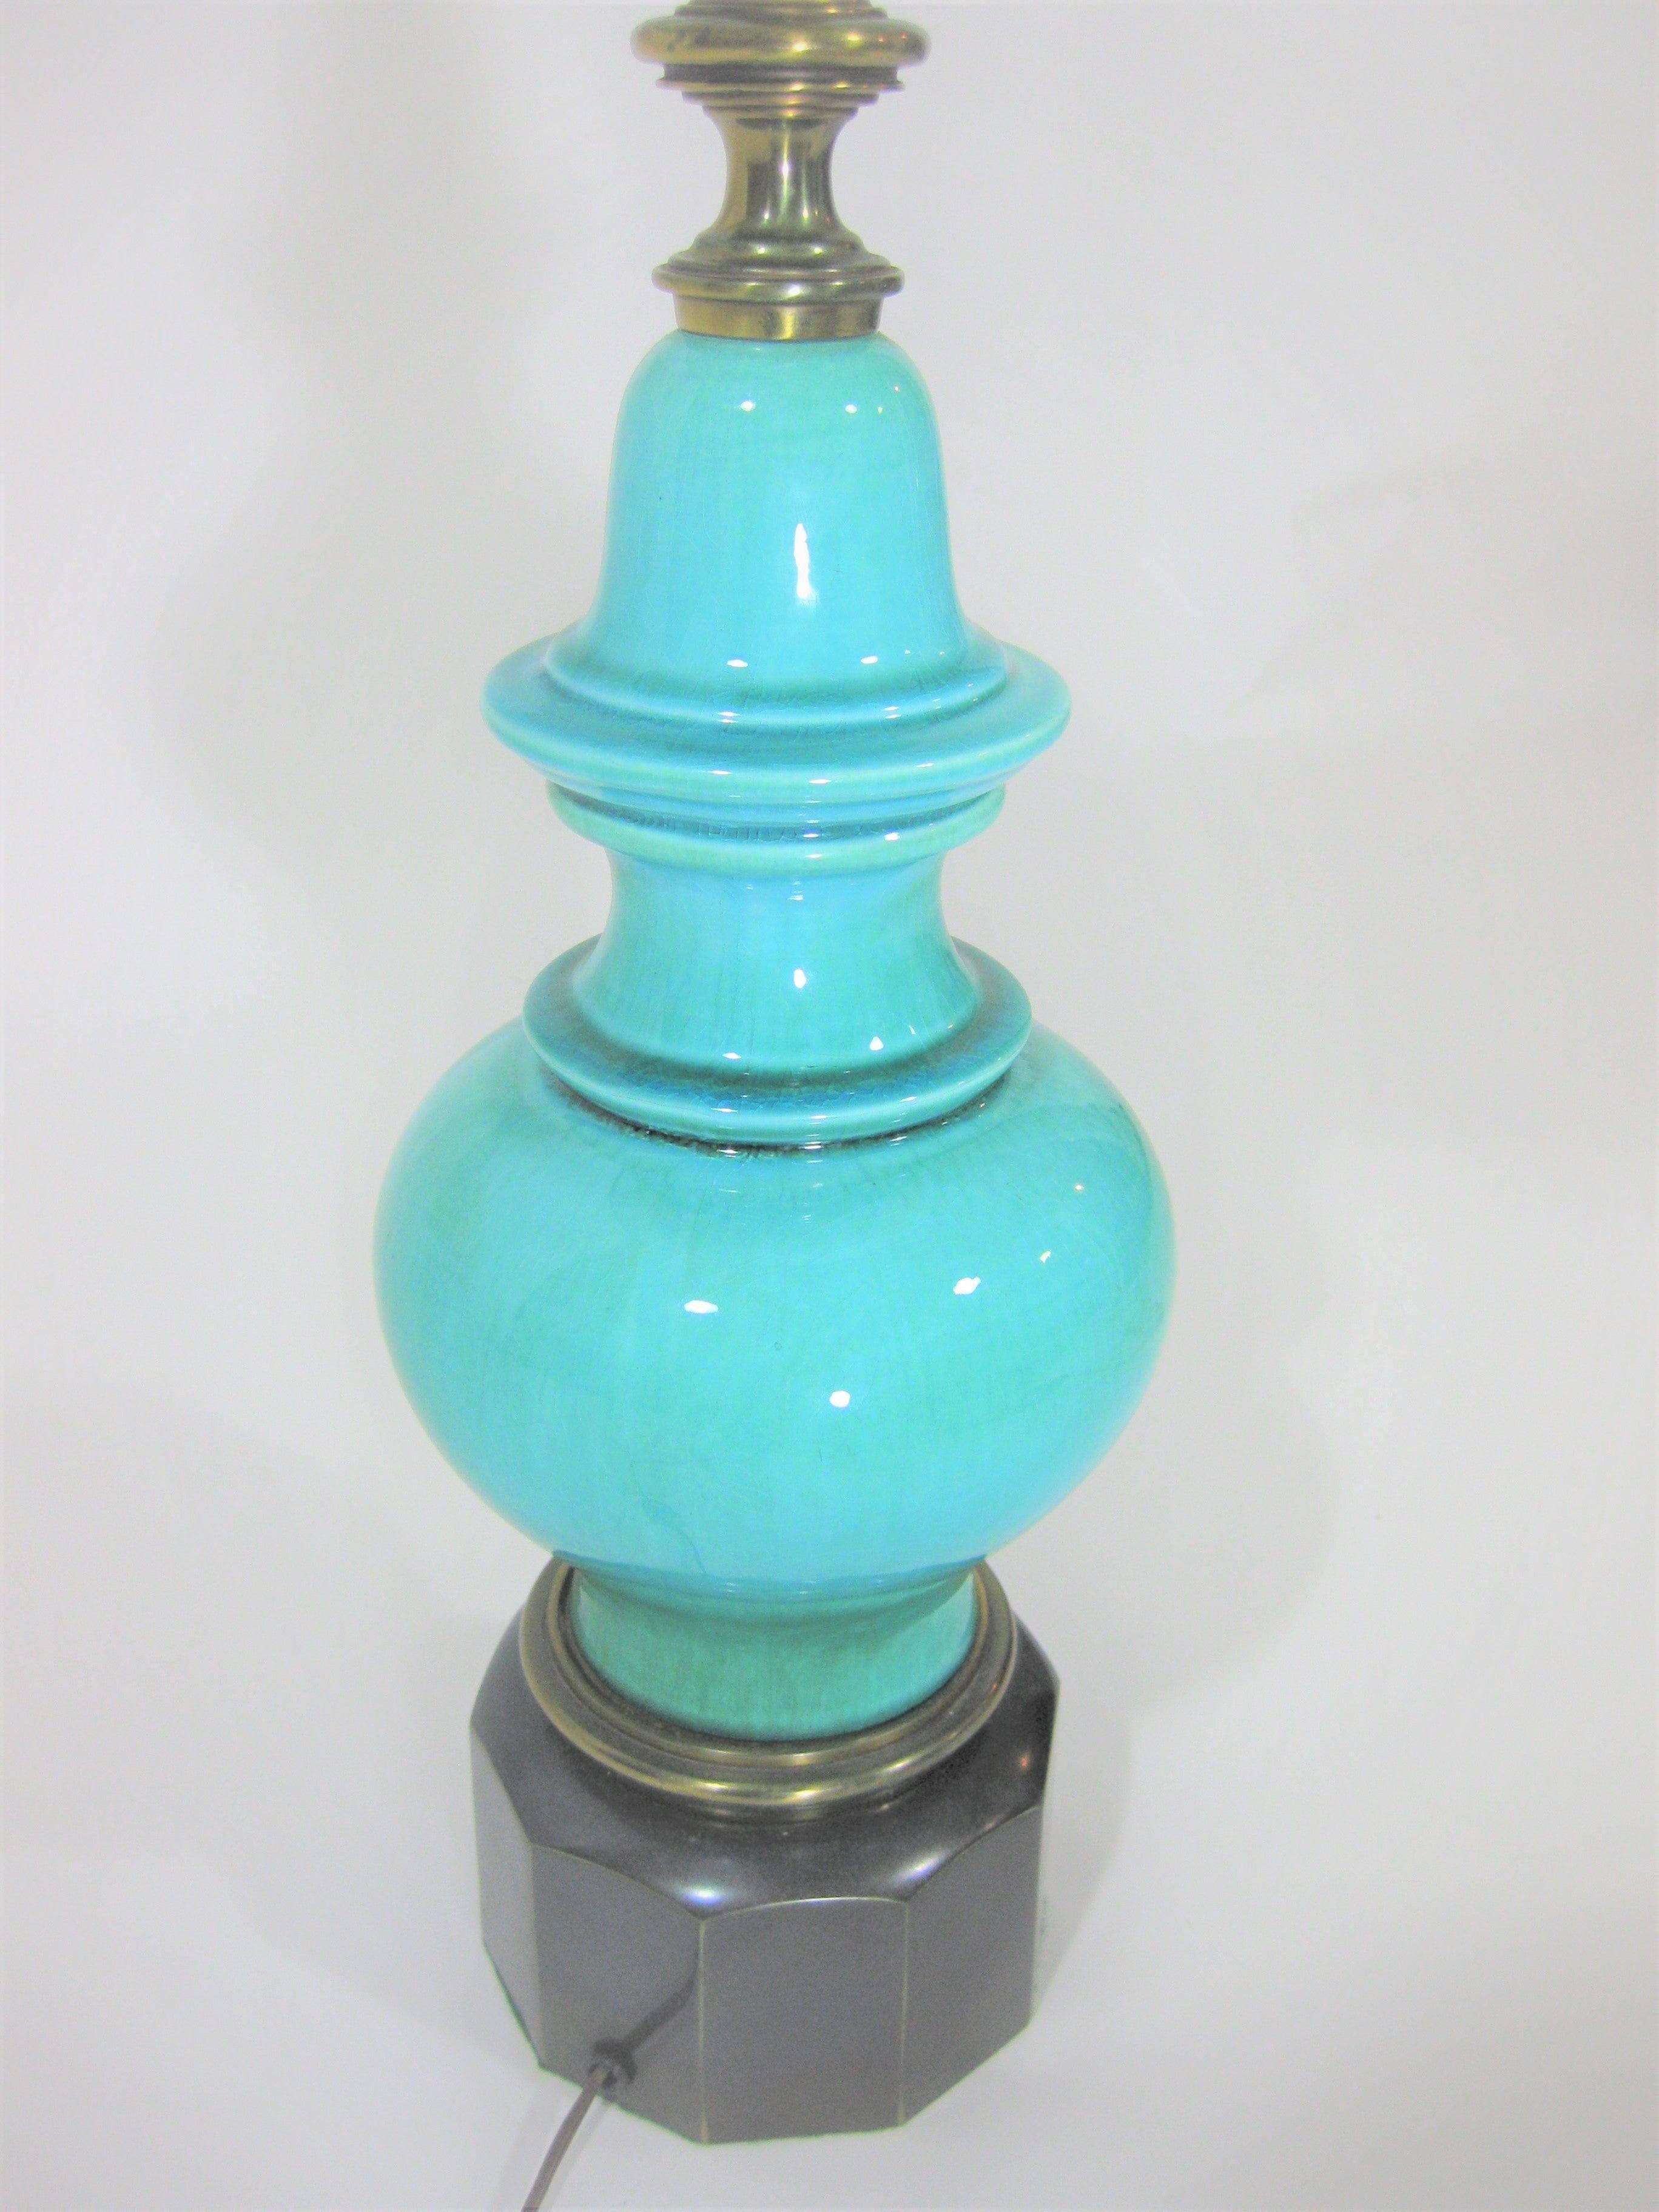 1950s Stiffel Lamp Turquoise Crackle Glaze Ceramic and Brass For Sale 1